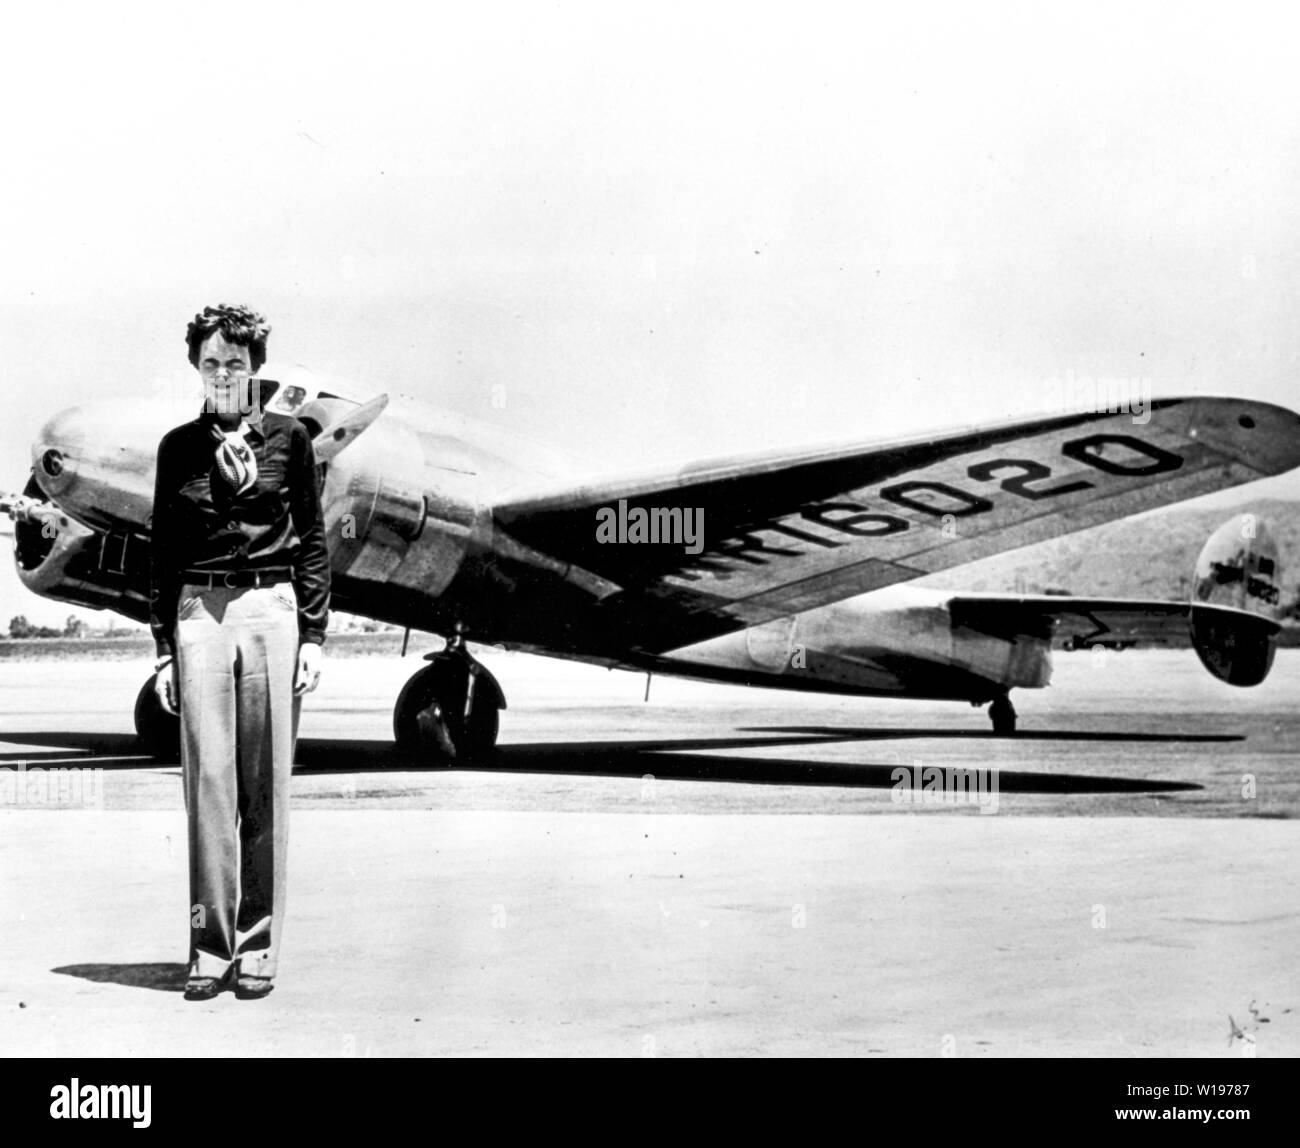 American aviation pioneer Amelia Earhart posing in front of the Lockheed Electra airplane, 1936. Image courtesy National Aeronautics and Space Administration (NASA). () Stock Photo